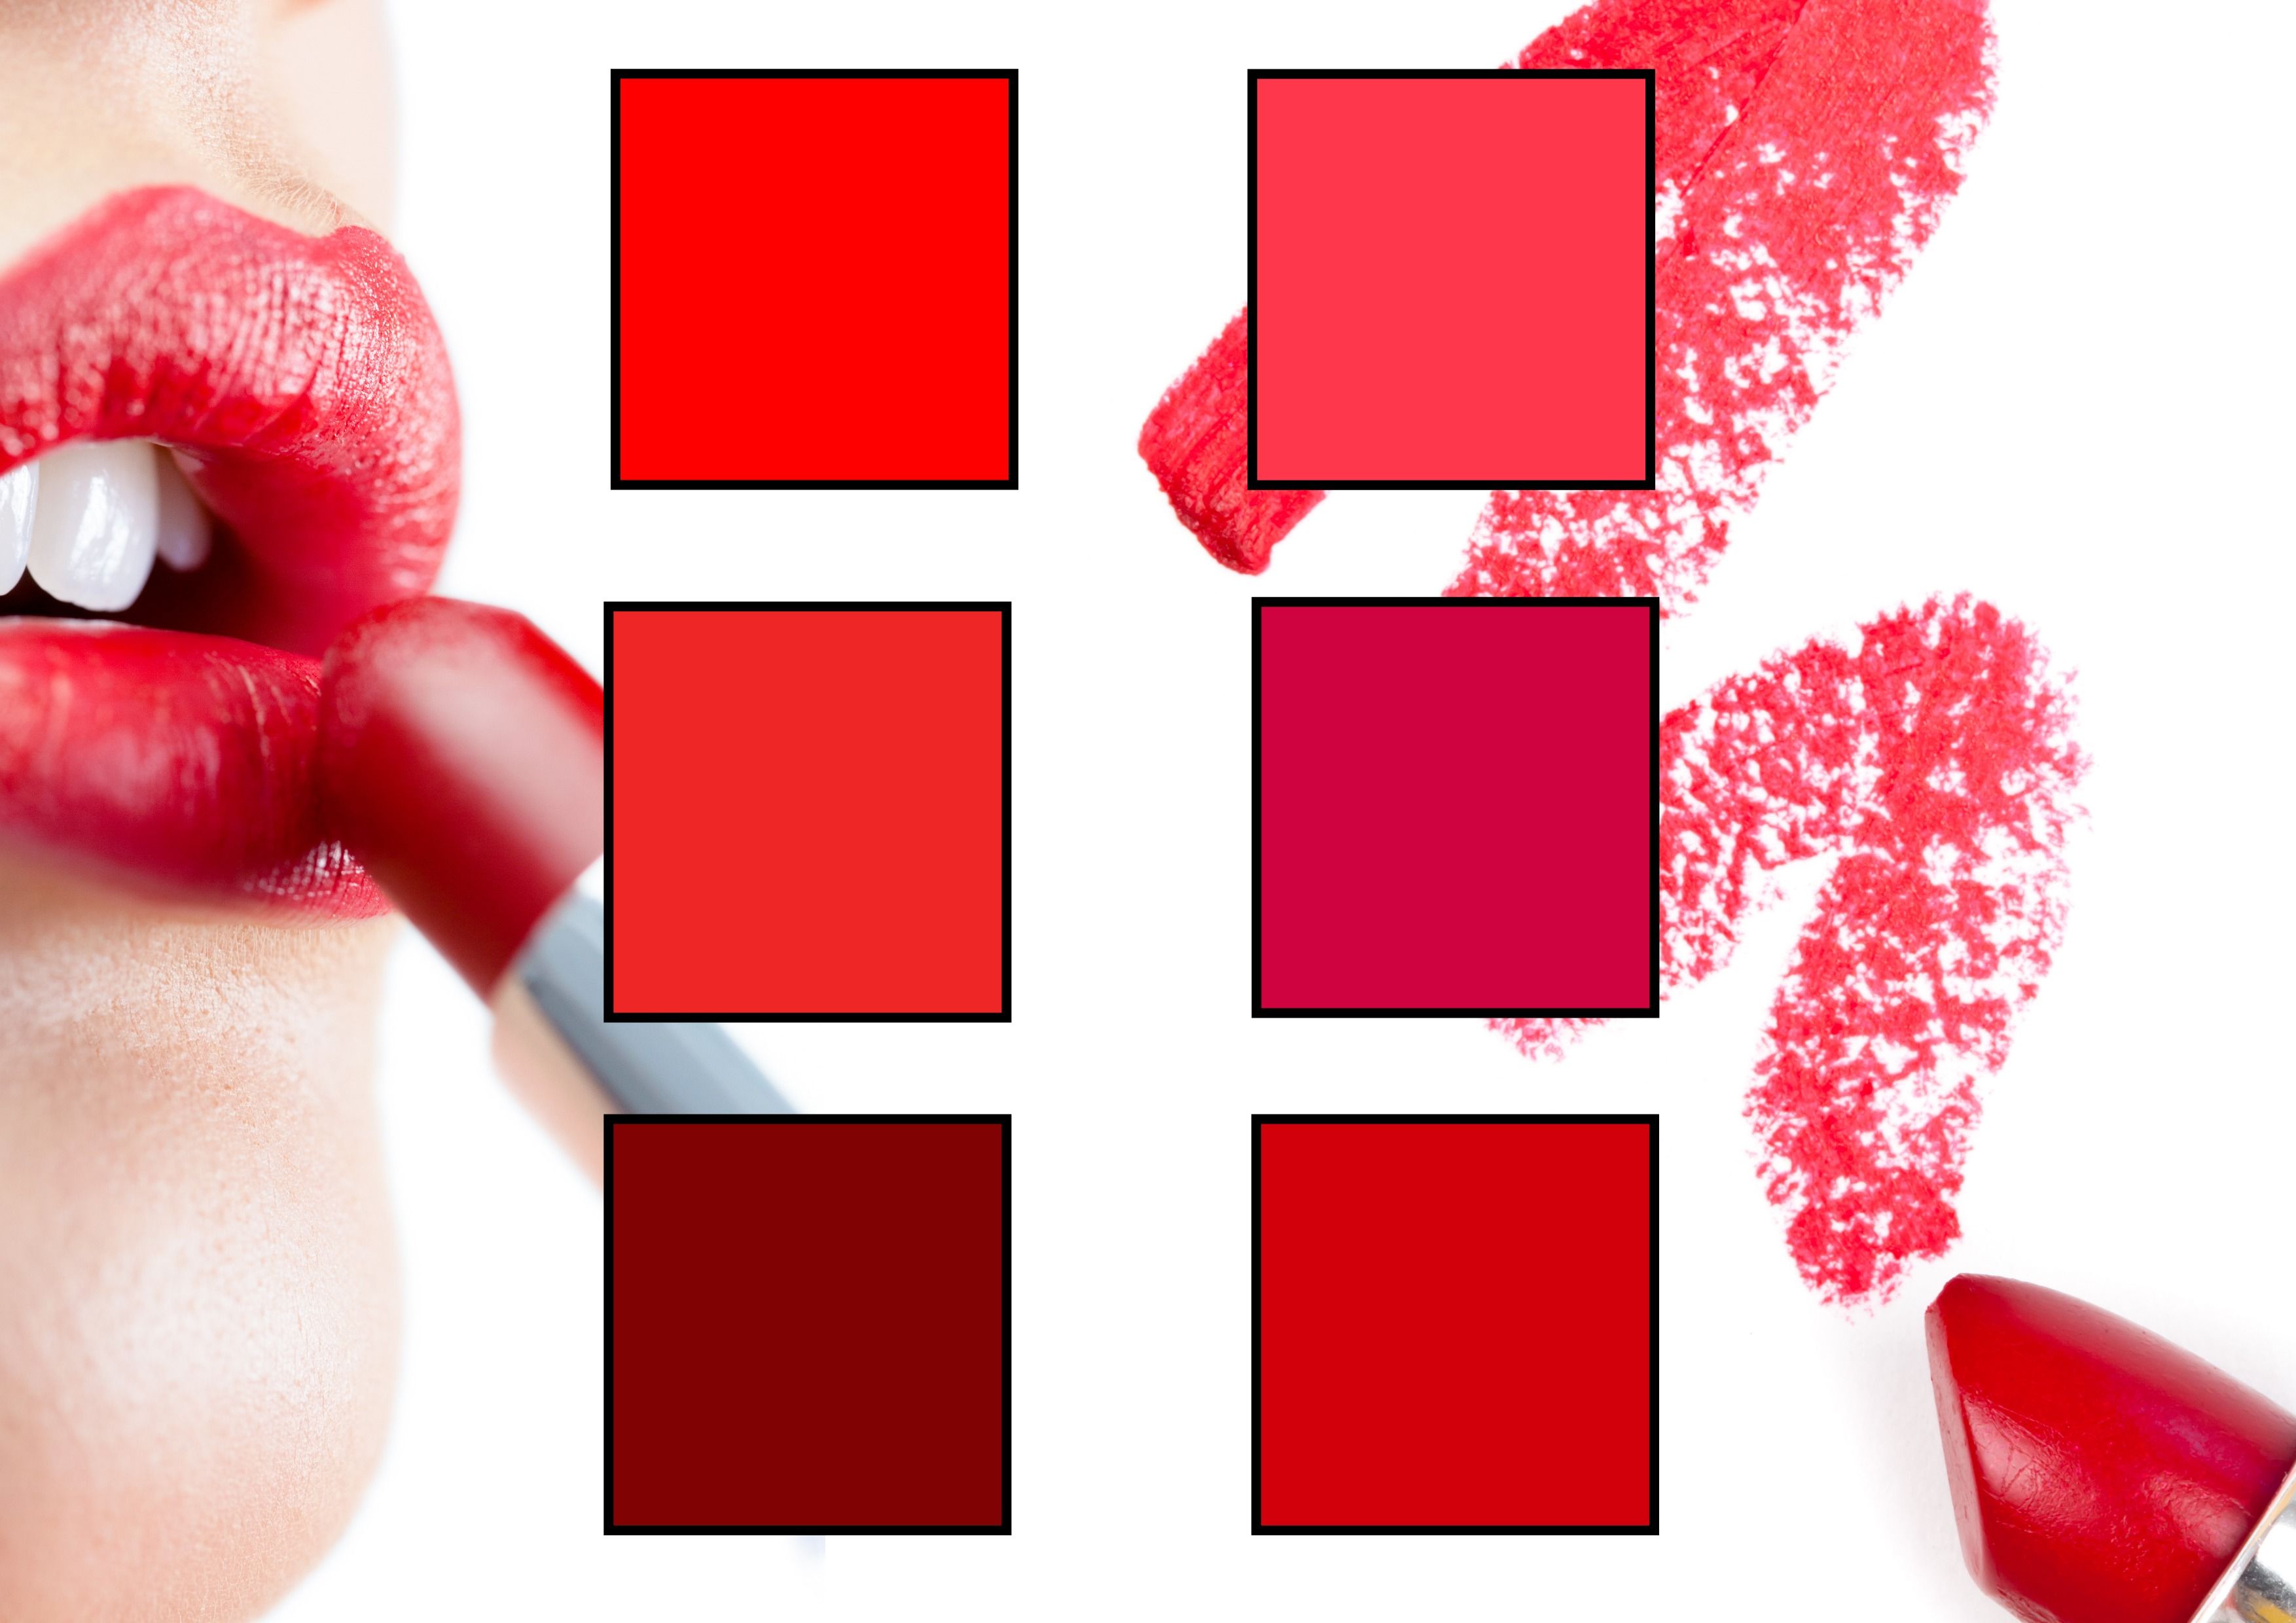 Future Lipstick Product Color Chart Collage with Colors in Grid Rows and Images - How to make a collage: A complete inspirational guide with examples - Image